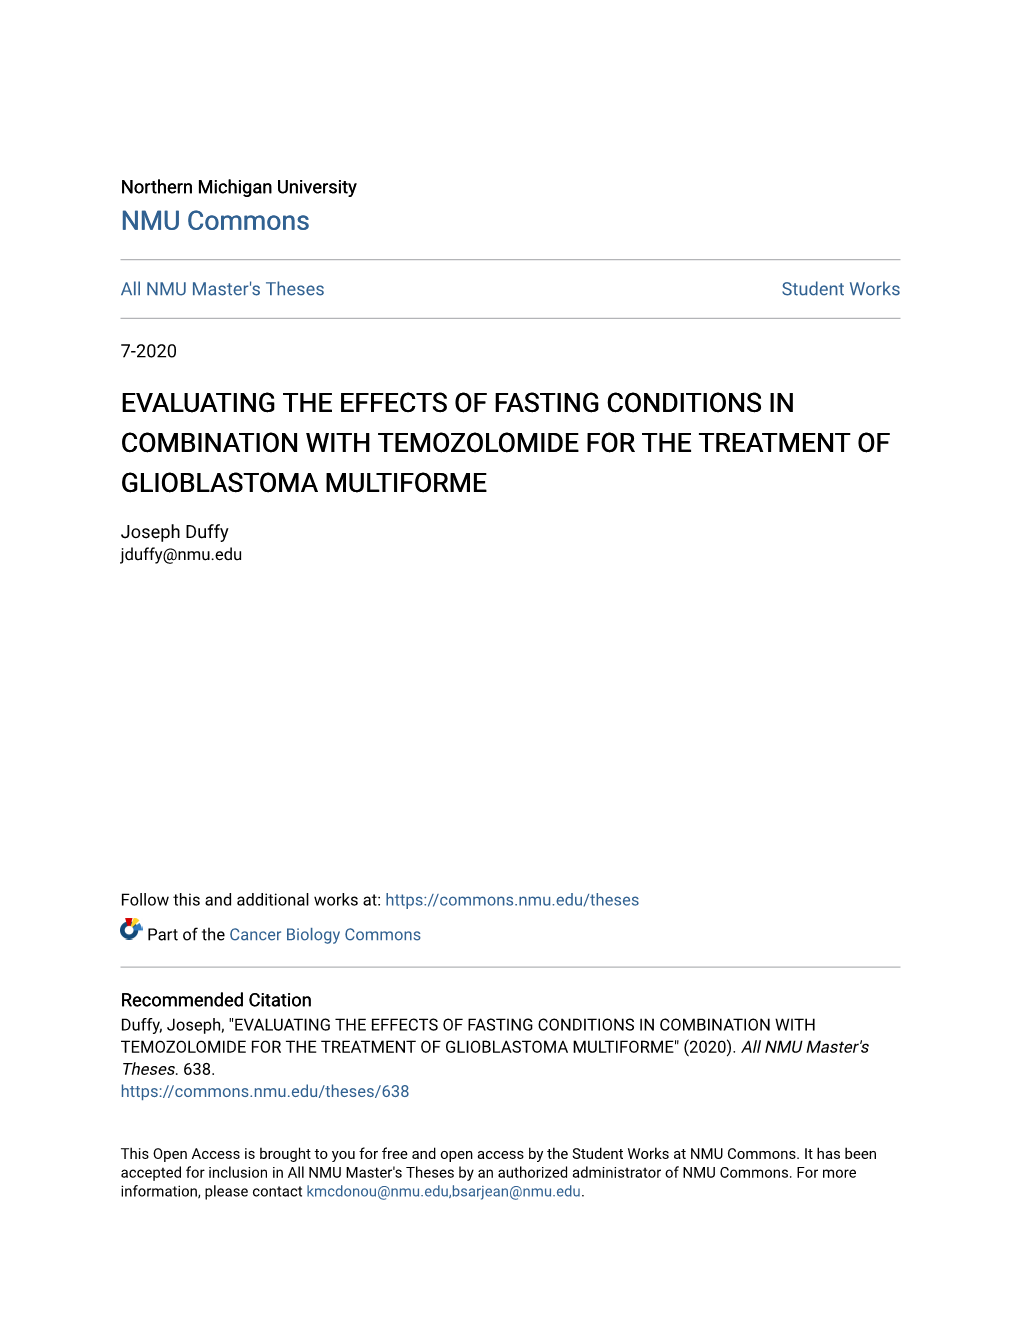 Evaluating the Effects of Fasting Conditions in Combination with Temozolomide for the Treatment of Glioblastoma Multiforme